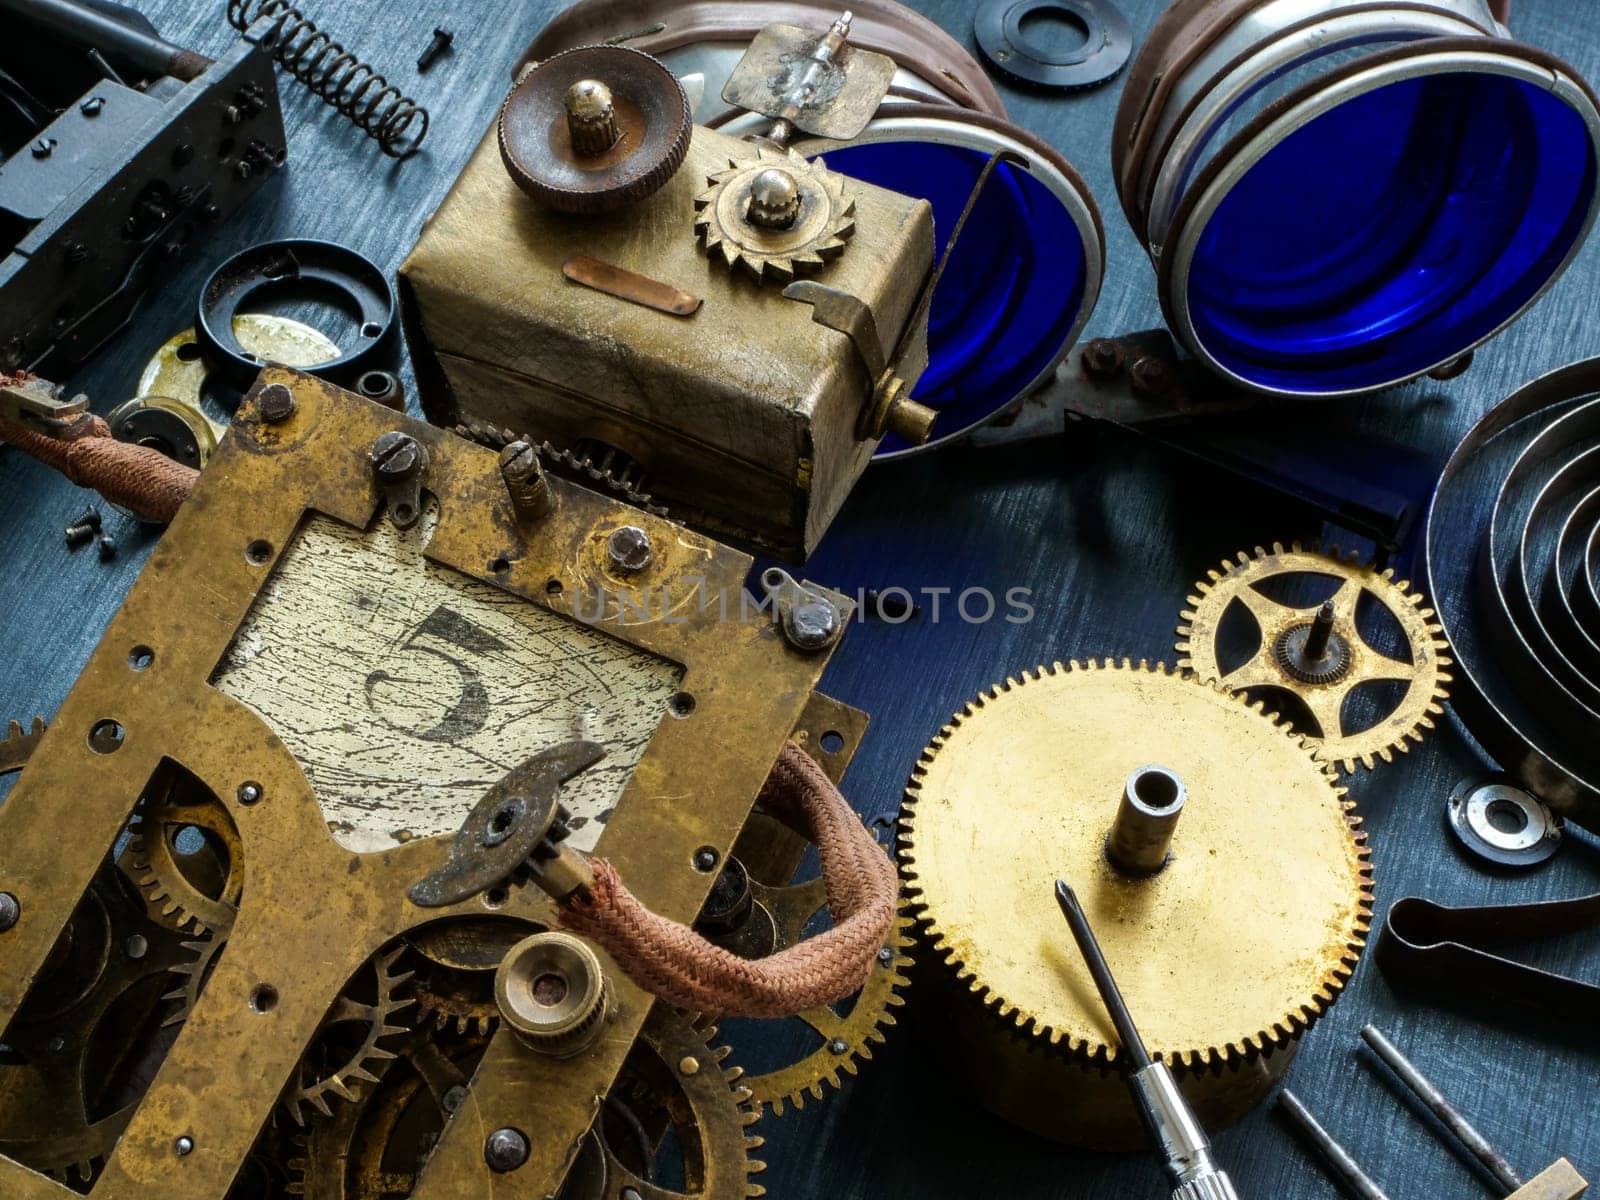 An old, mechanical robot lies on gears and spare parts.